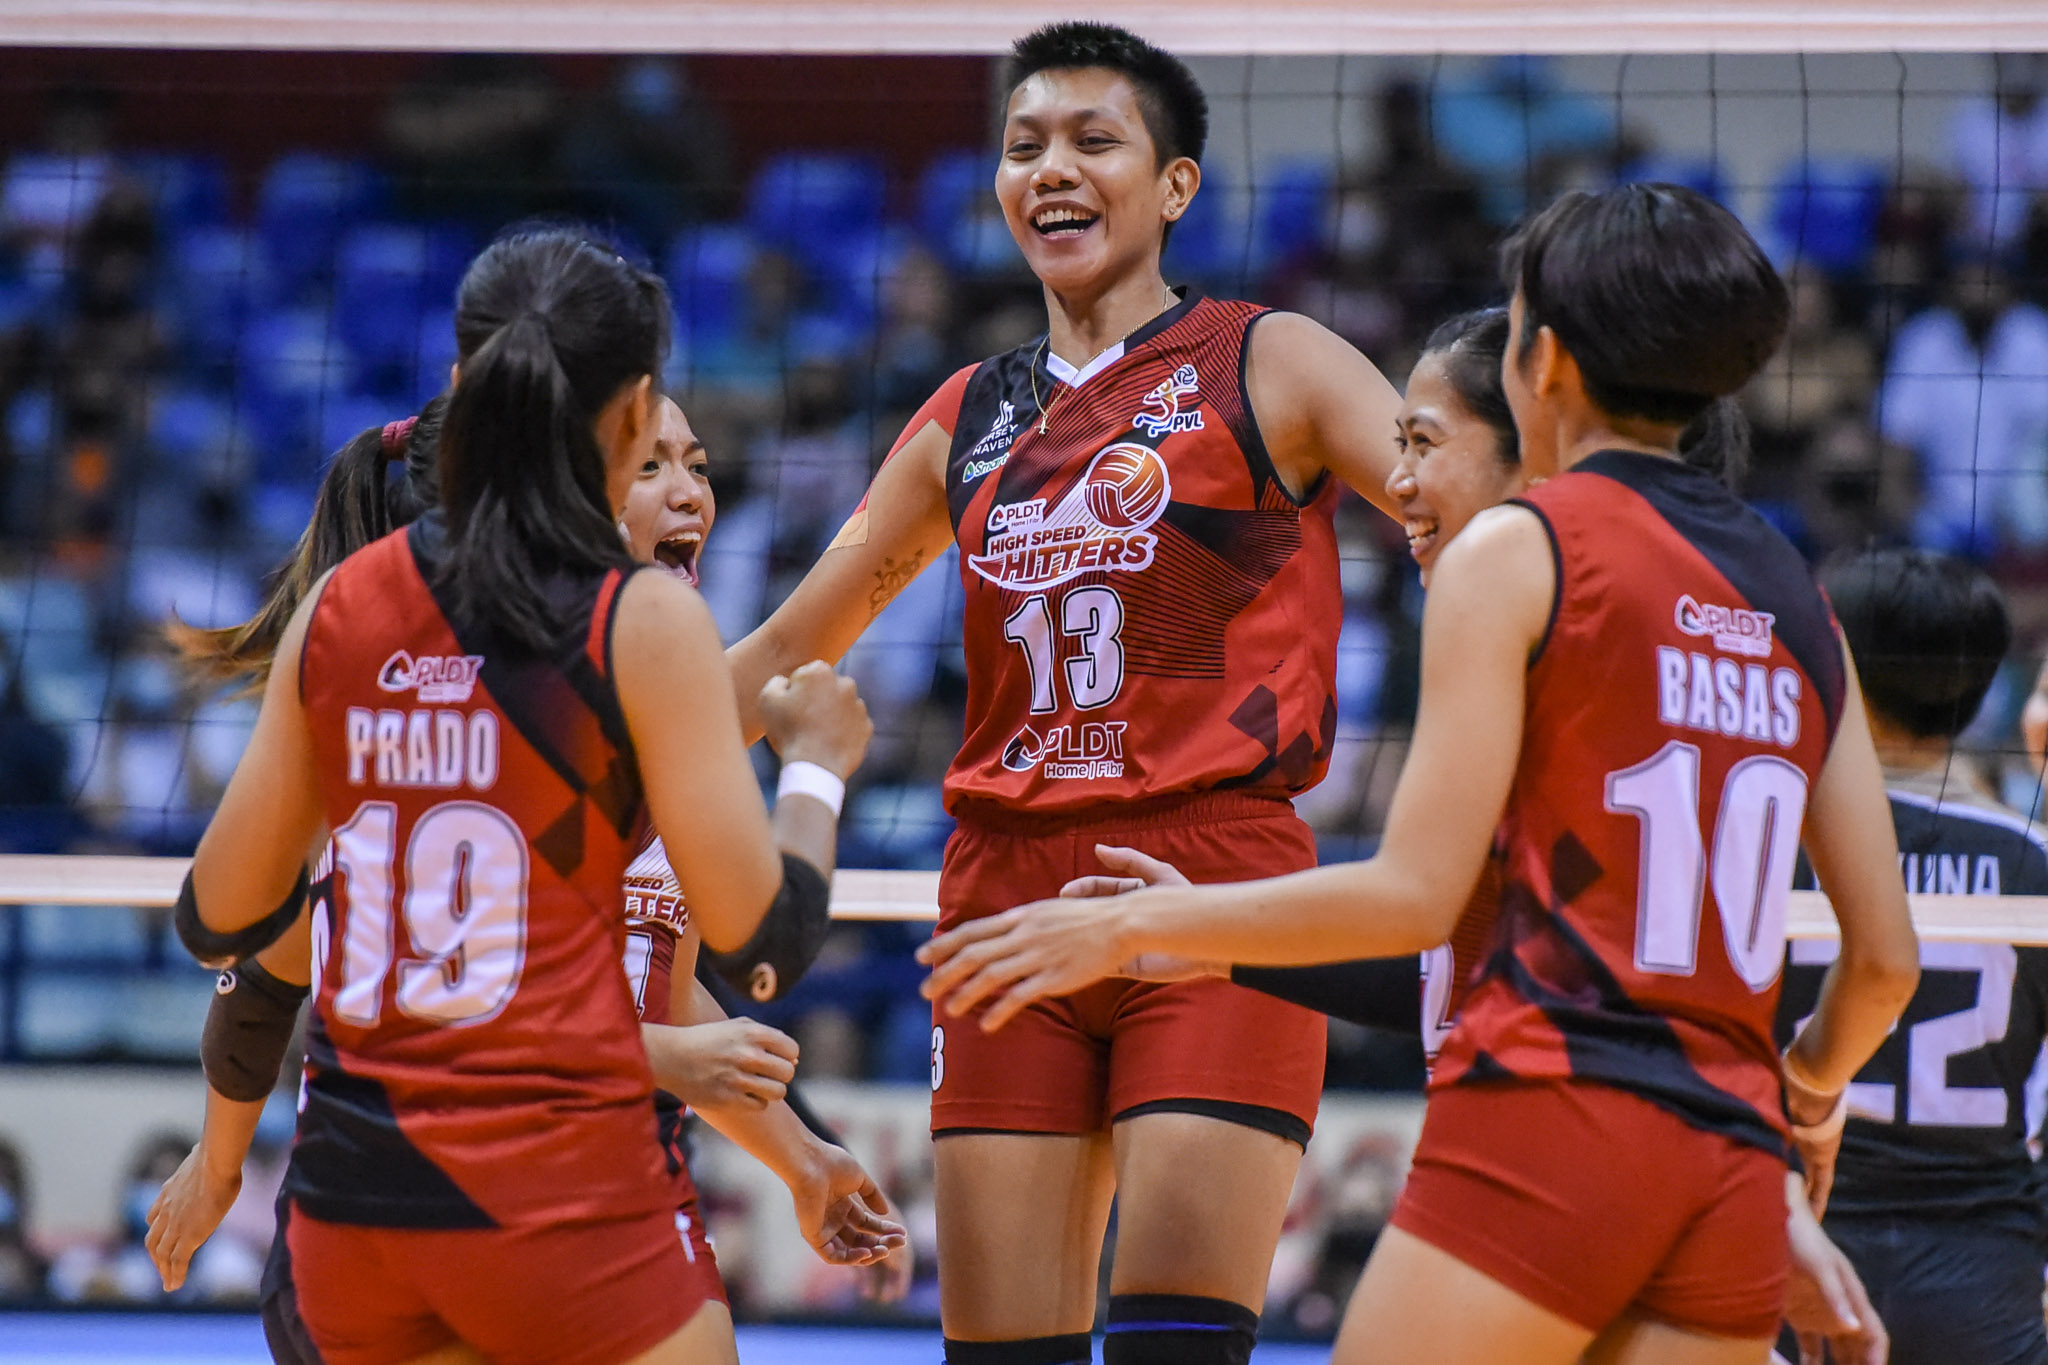 Dell Palomata and PLDT celebrate a point. 